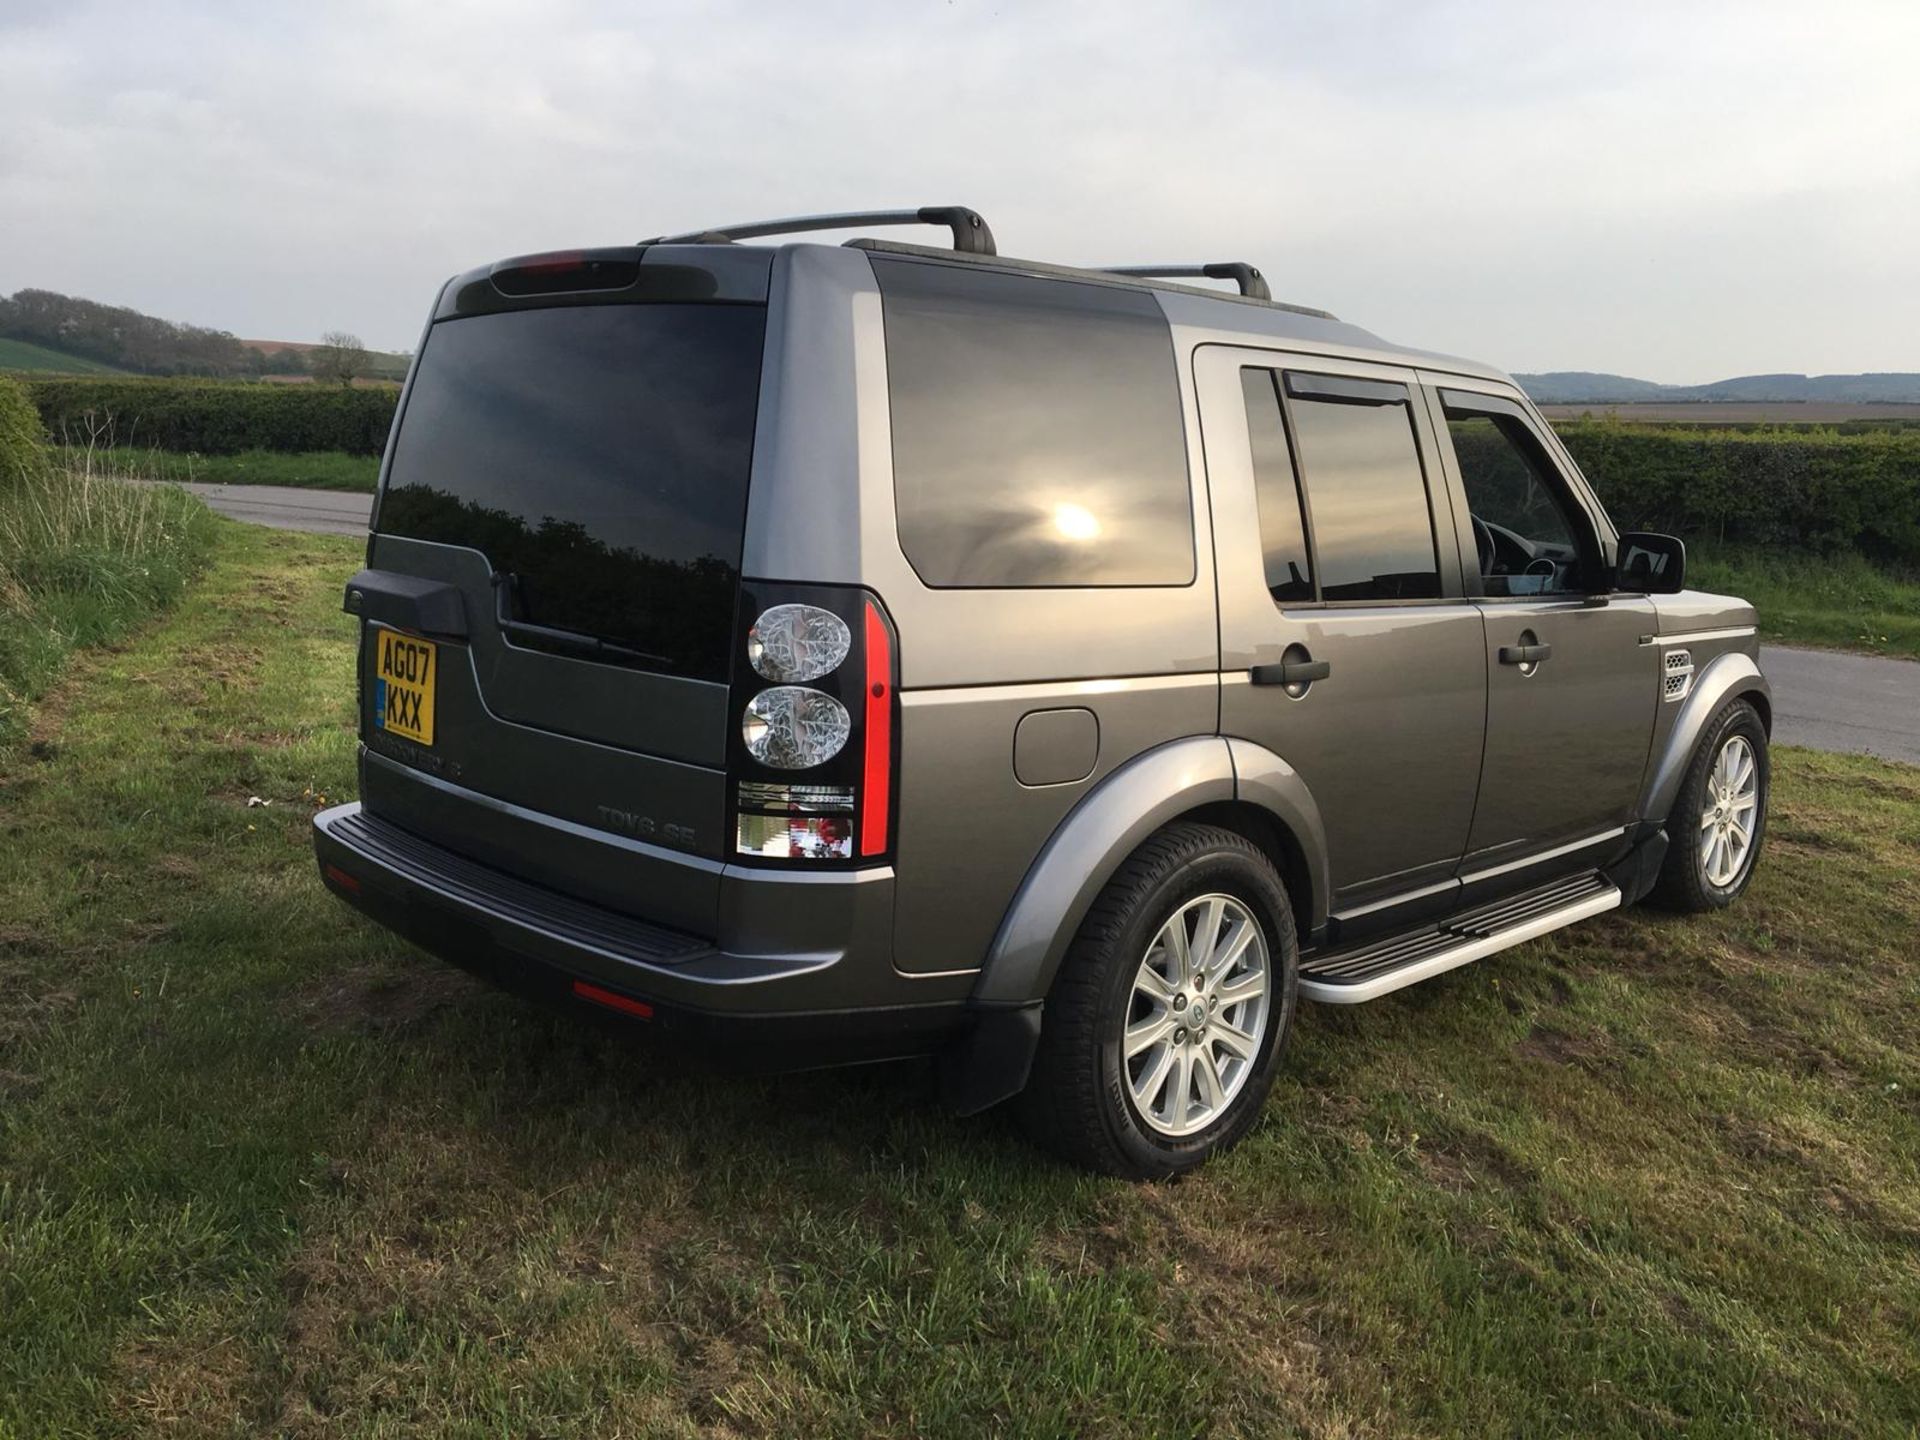 2007/07 REG LAND ROVER DISCOVERY 3 TDV6 SE AUTOMATIC 2.7 DIESEL 4X4, 7 SEAT FACELIFT LIGHTS *NO VAT* - Image 8 of 16